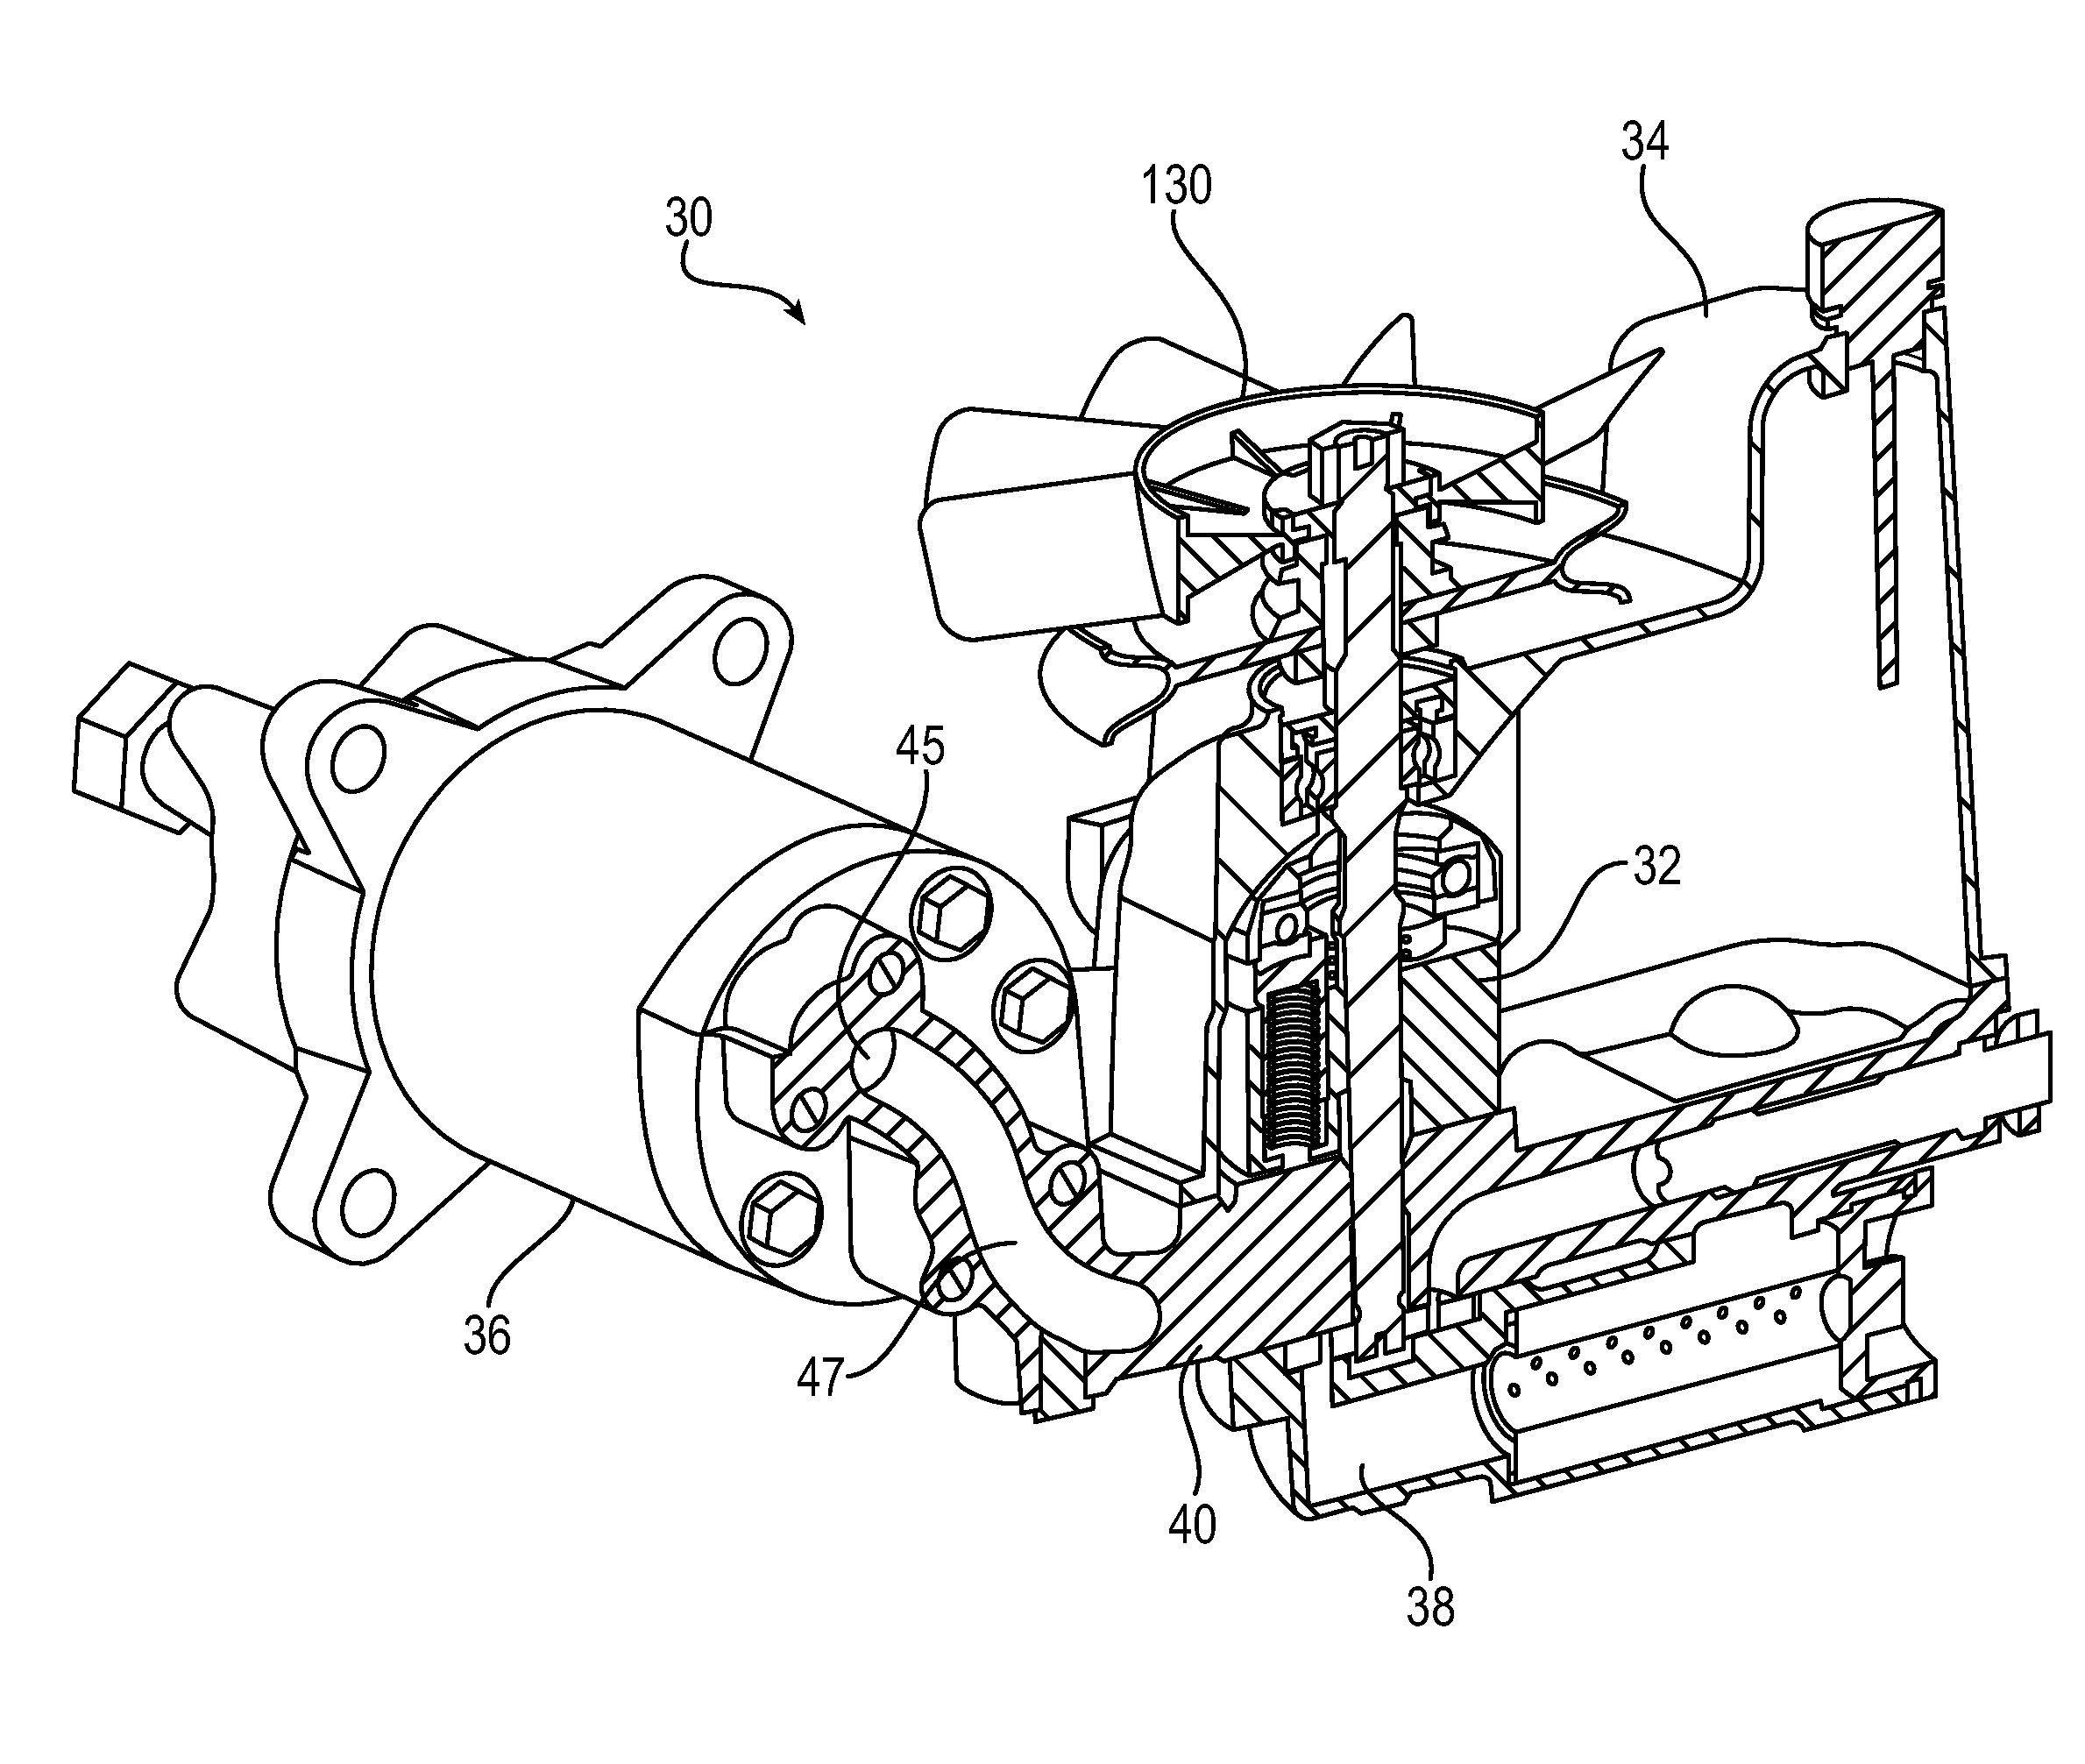 Hydrostatic transmission with integrated pump and motor